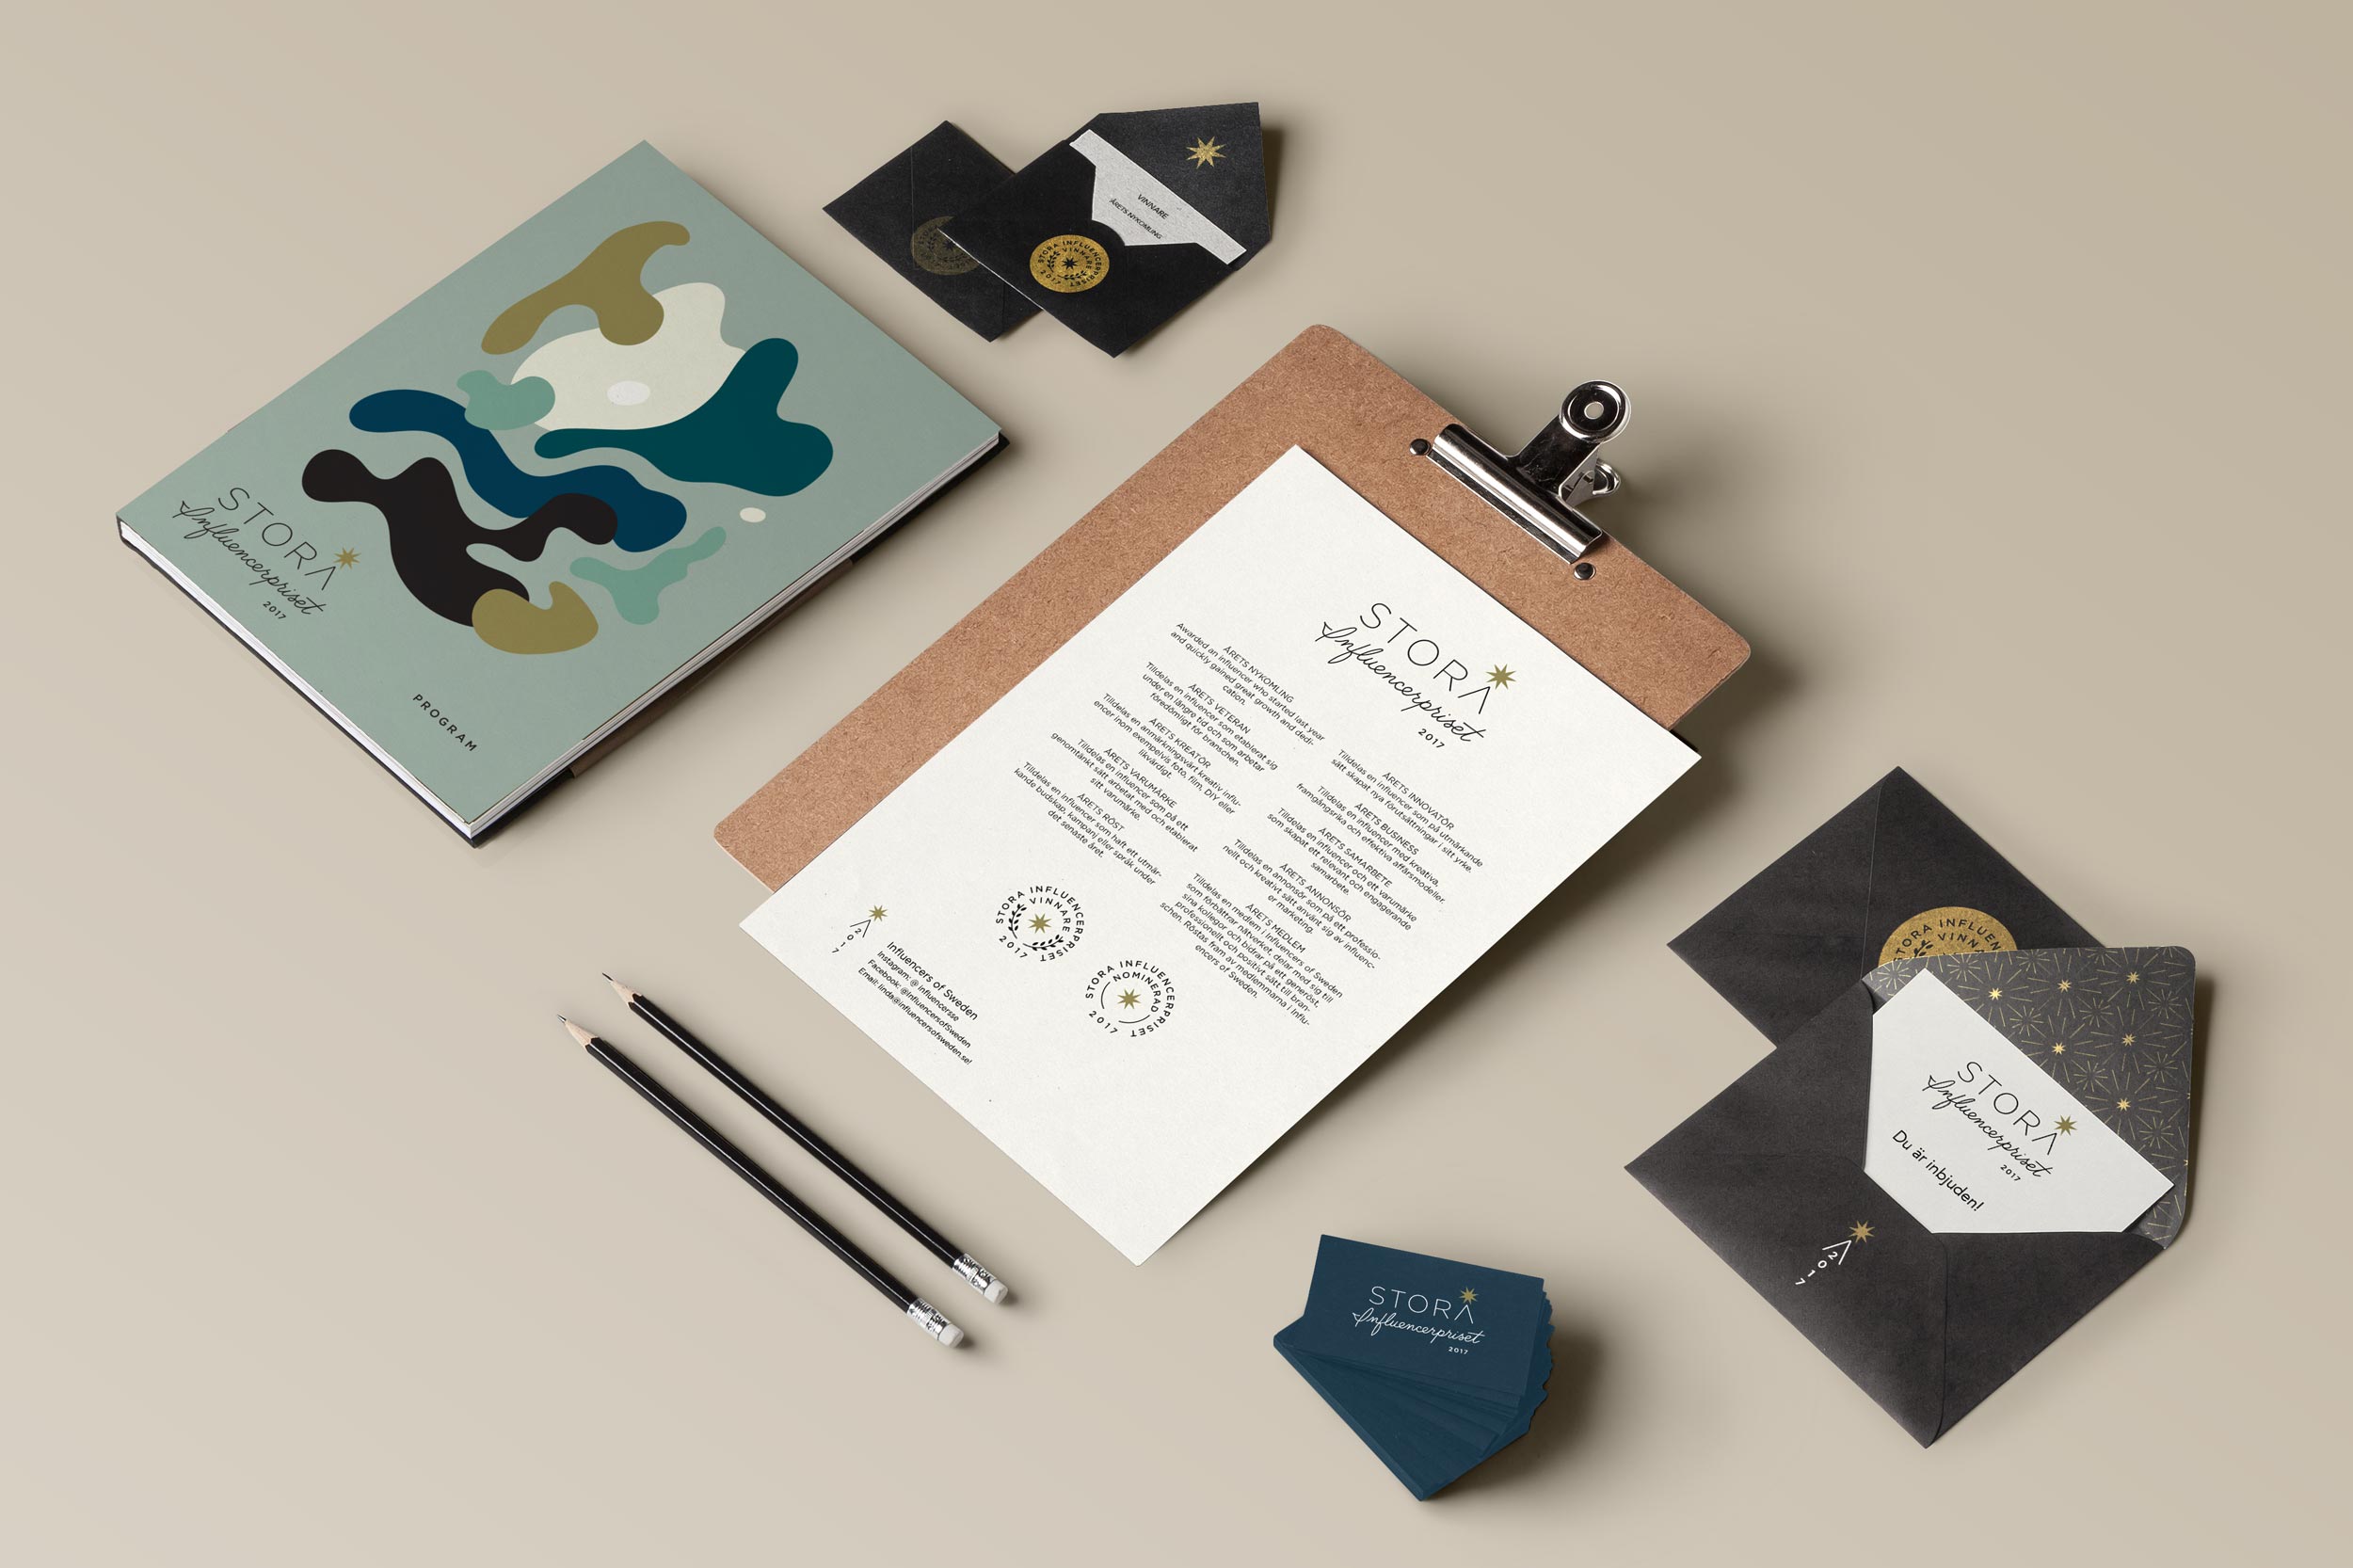 Stora Influencerpriset stationery laid out neatly